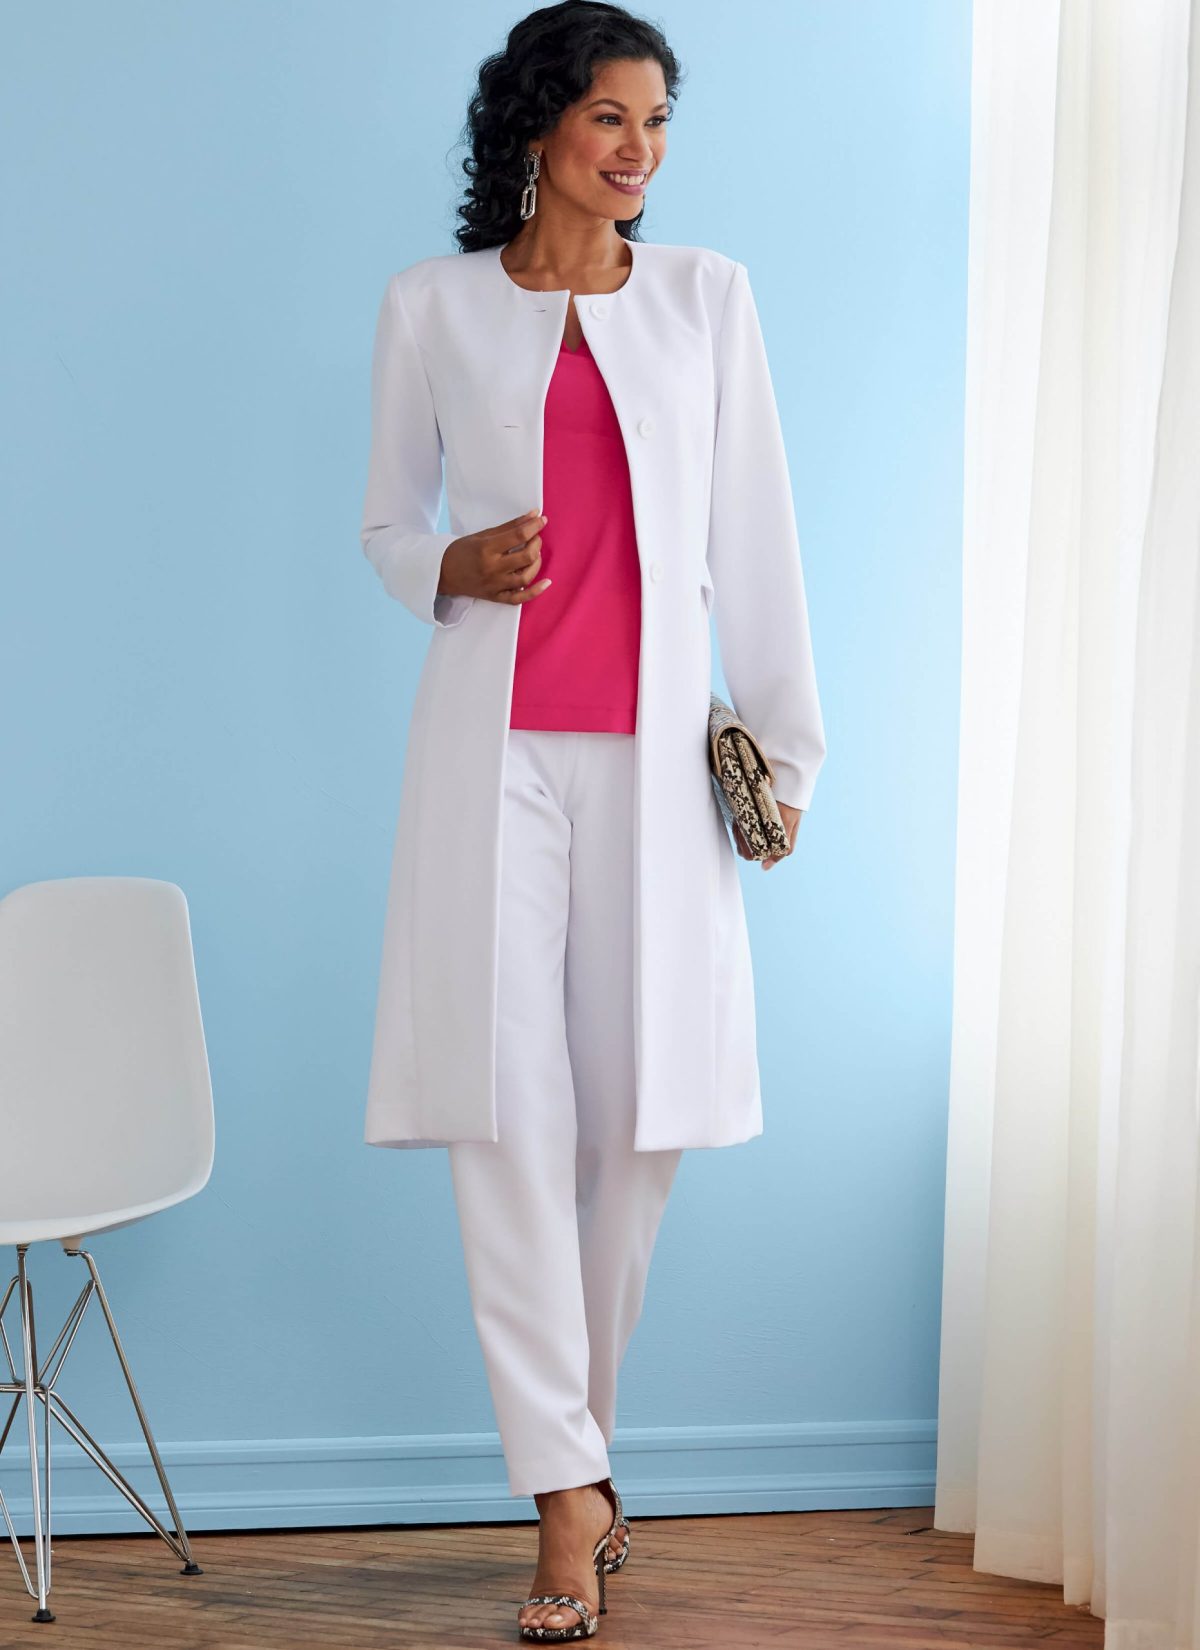 Butterick Sewing Pattern B6740 Misses' Jacket, Coat, Top & Trousers